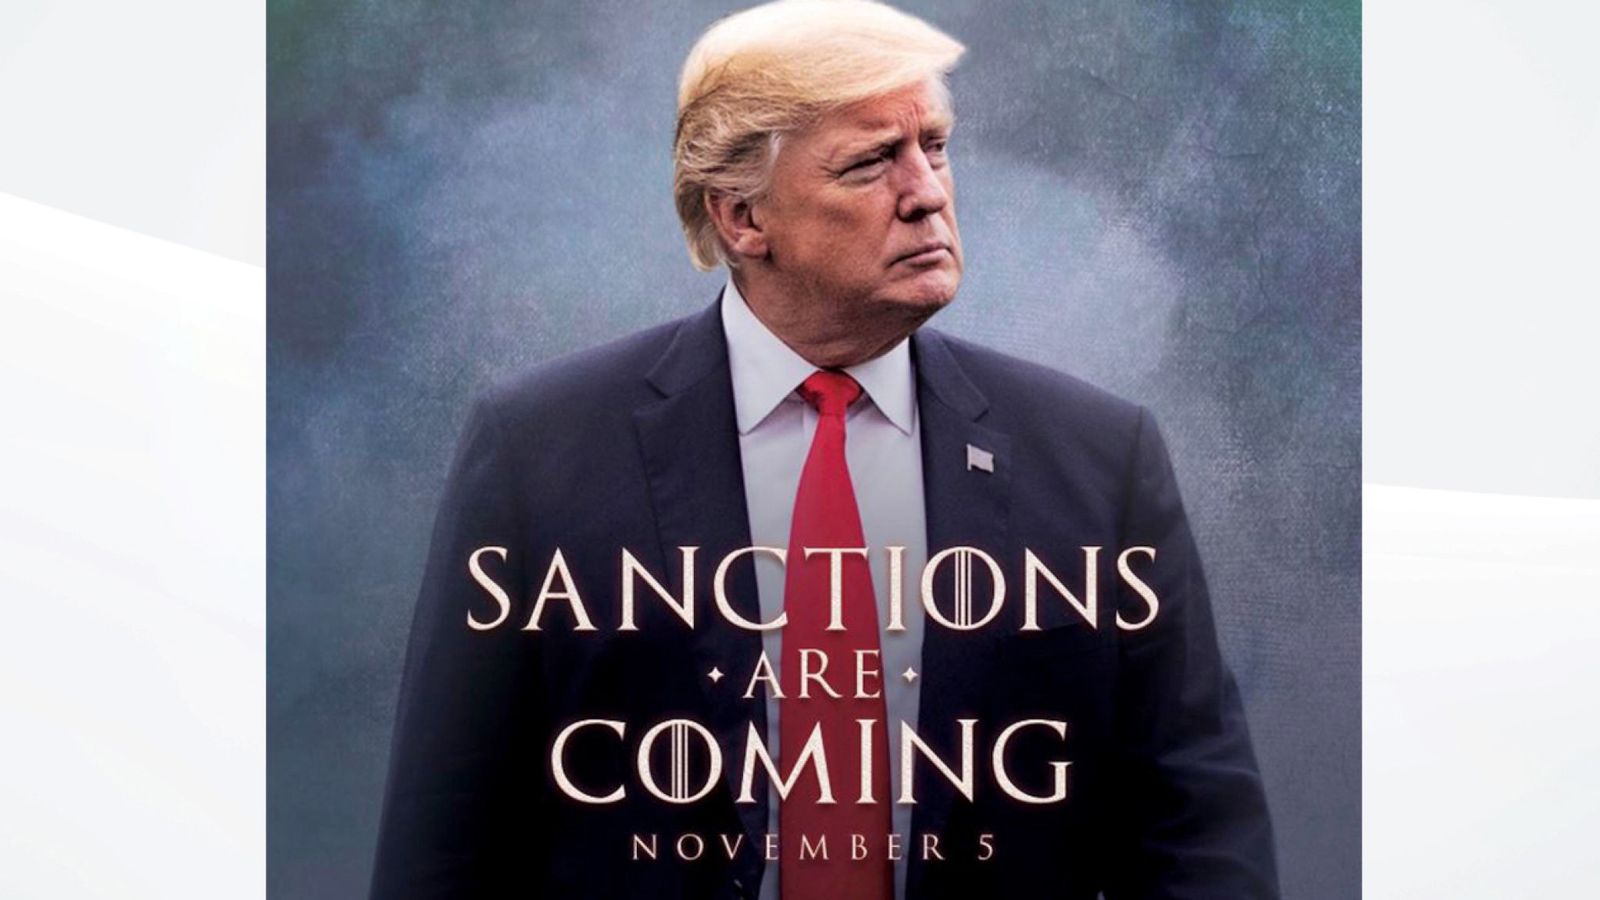 Donald Trump Posted This Dramatic Image On His Twitter - Sanction Is Coming Trump - HD Wallpaper 